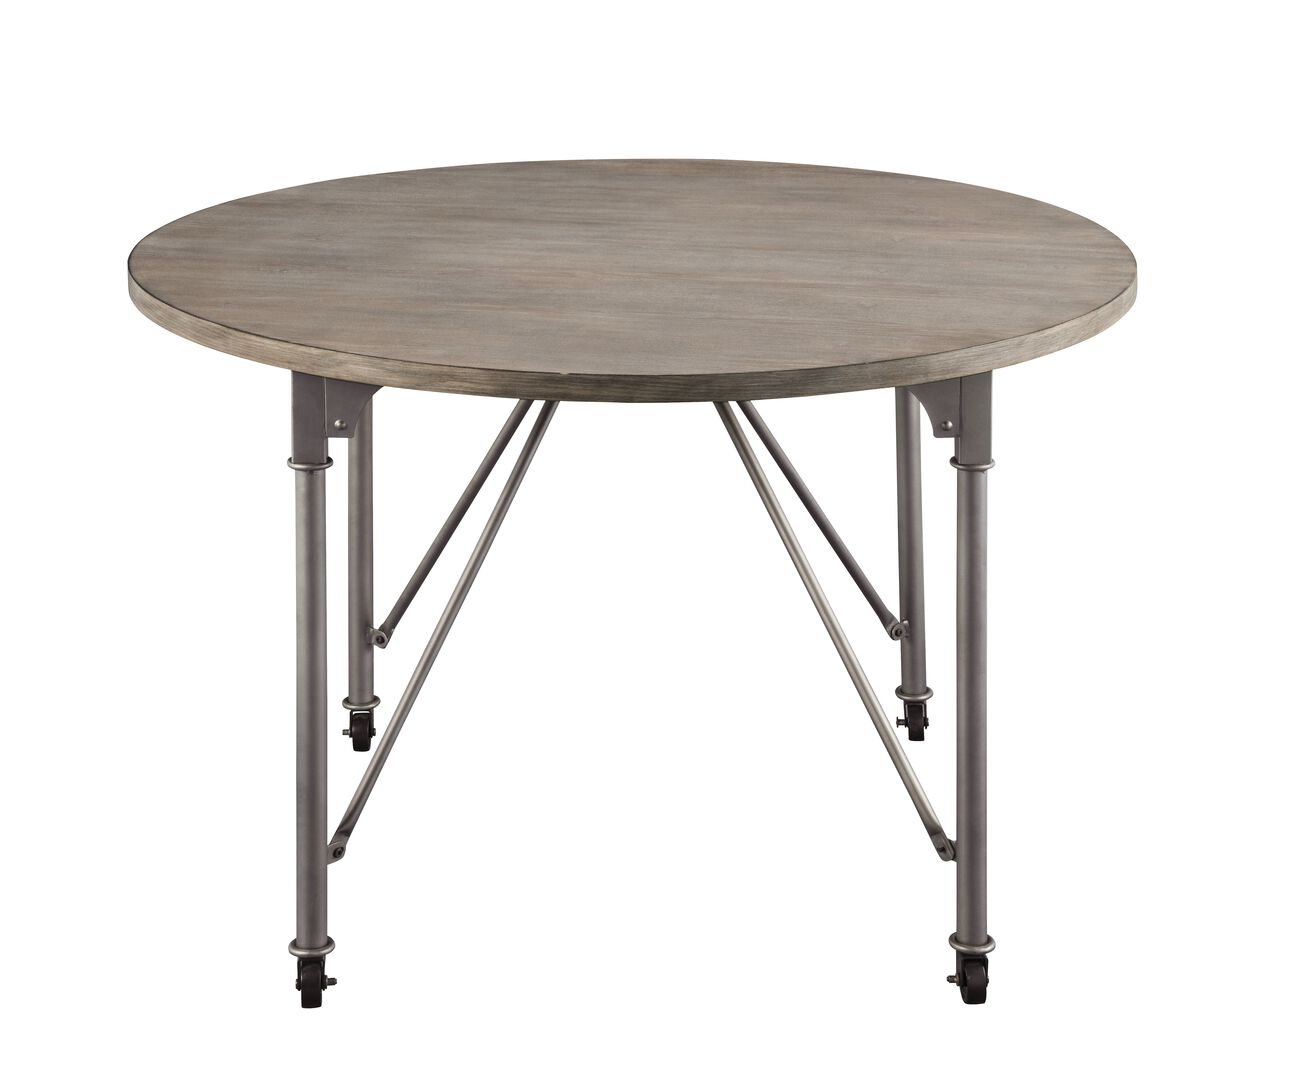 Metal Dining Table with Circular Wooden Top and Caster Wheels, Gray